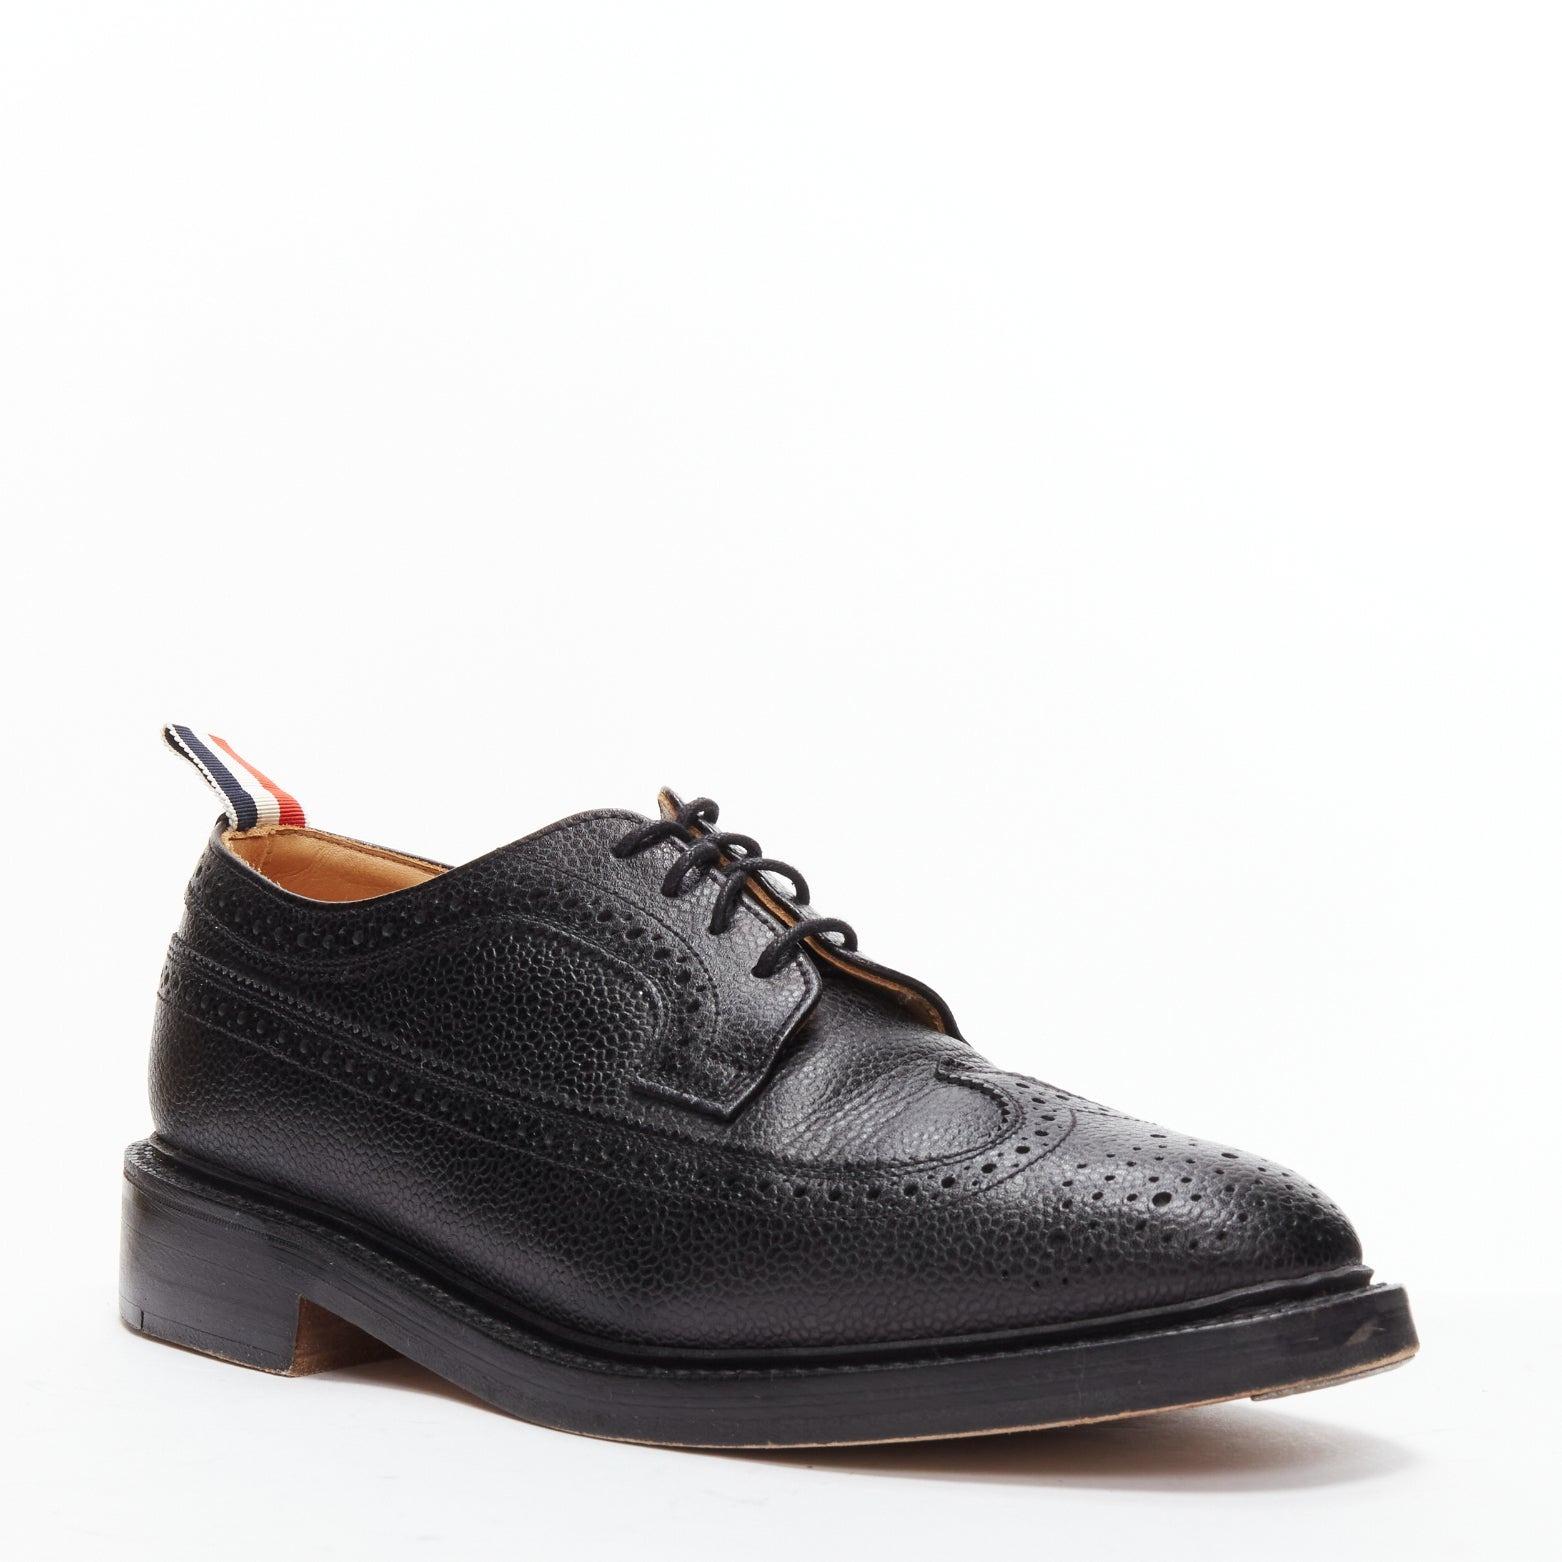 Black THOM BROWNE black grained leather perforated oxford brogue shoes EU42.5 For Sale